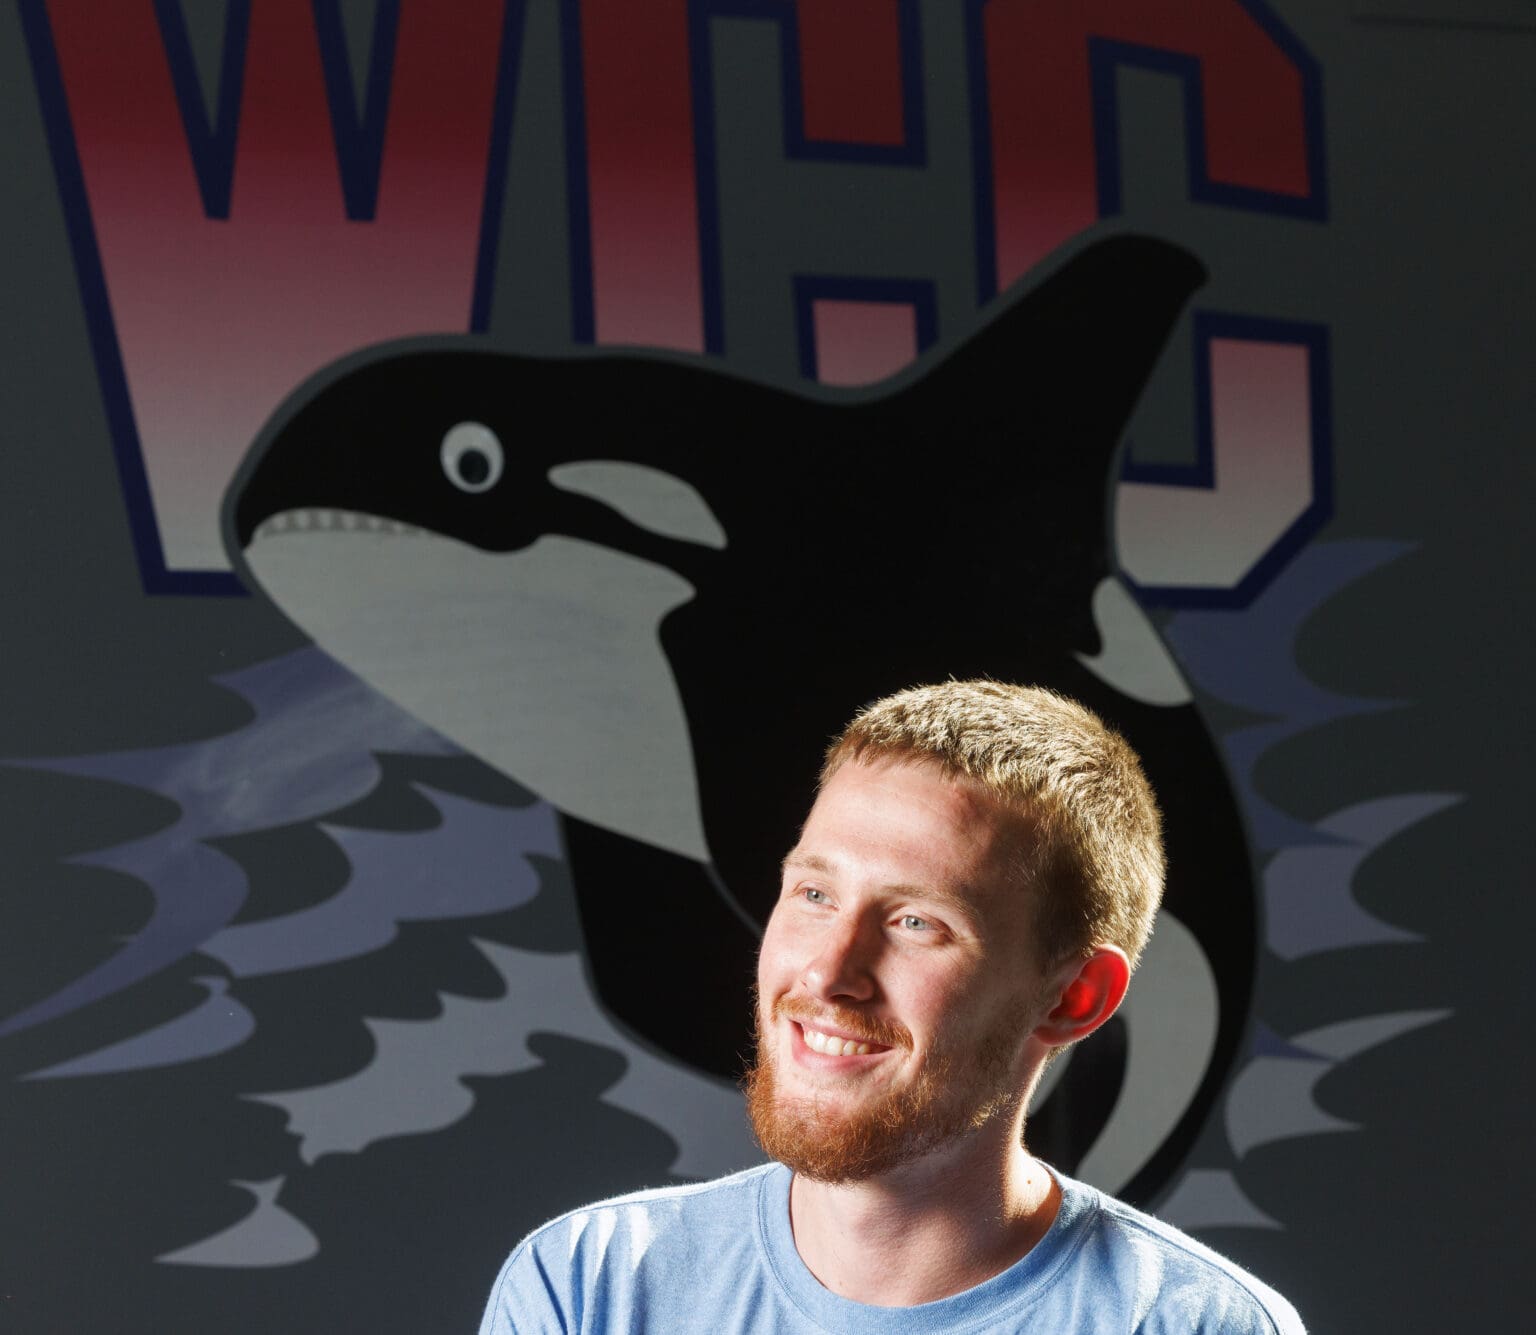 Alex Sommerfield, 25, smiles in front of WCC's orca logo.